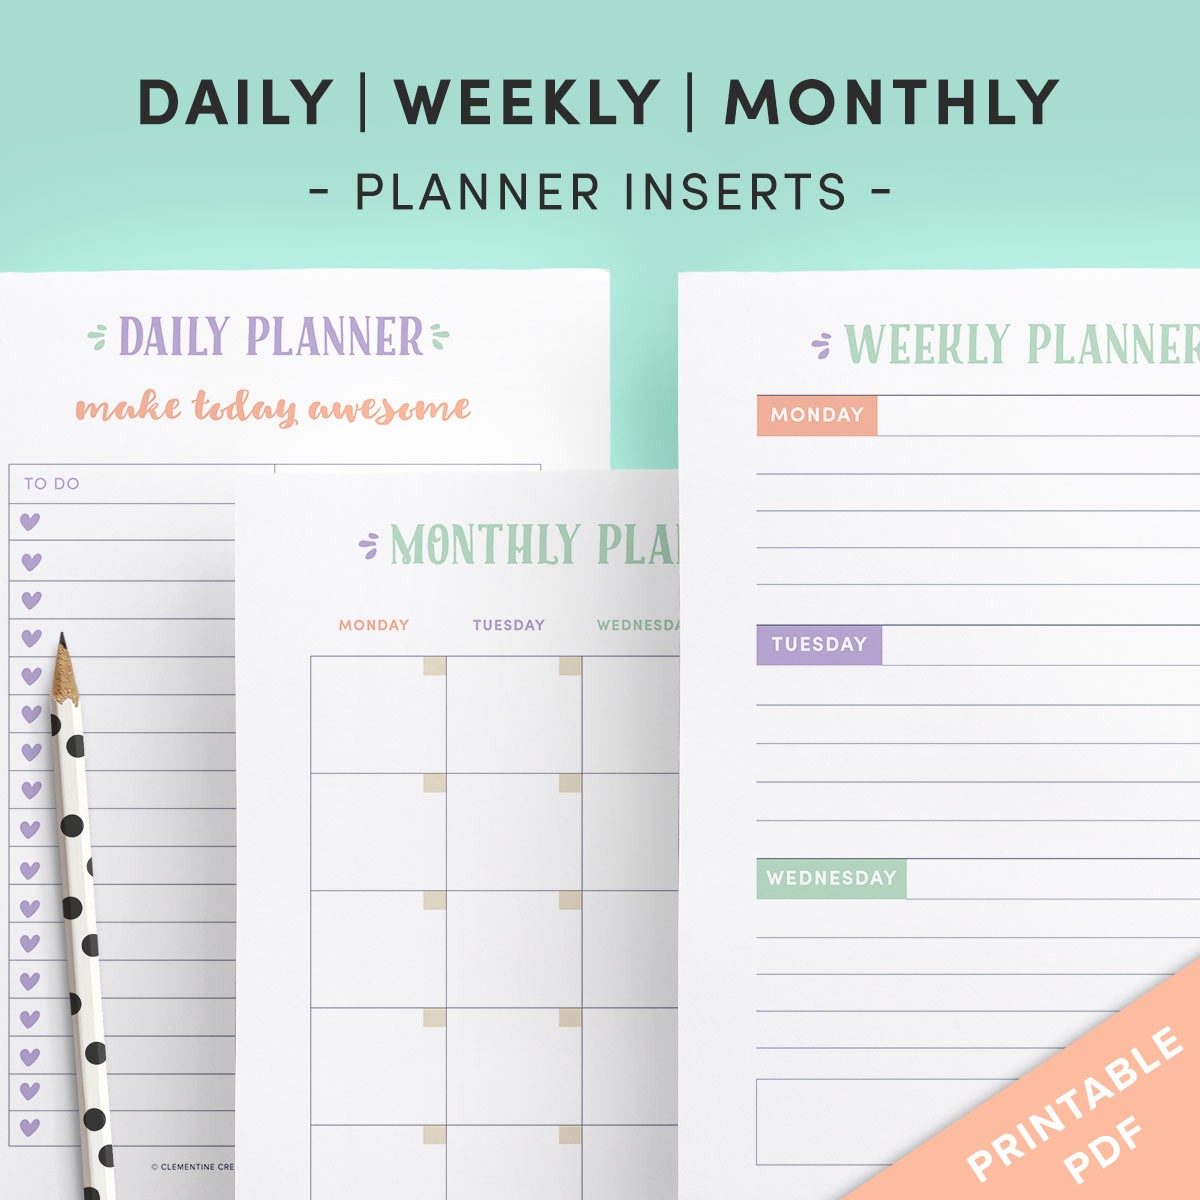 Daily Weekly Monthly Planner Template Beautiful Printable Daily Weekly and Monthly Planner Inserts